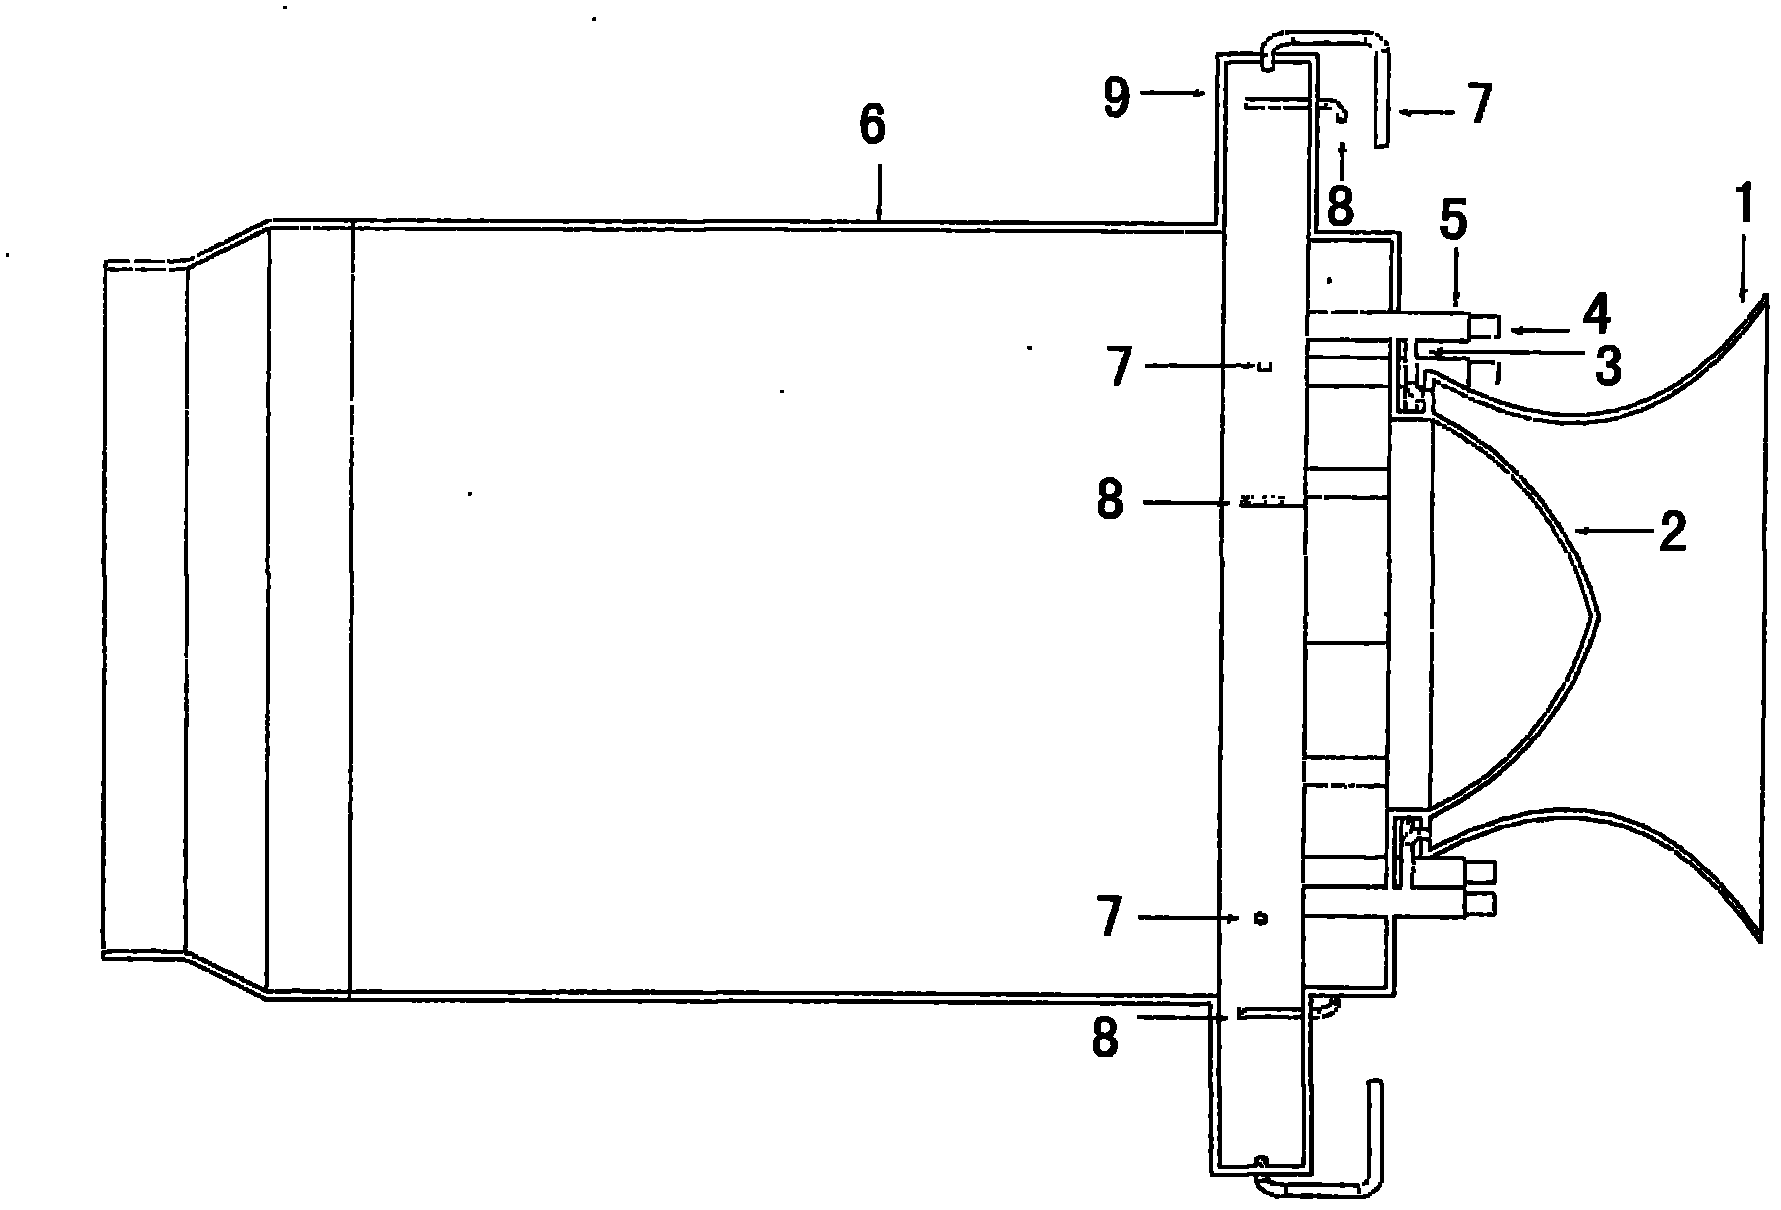 Flameless trapped vortex burner for gas turbine